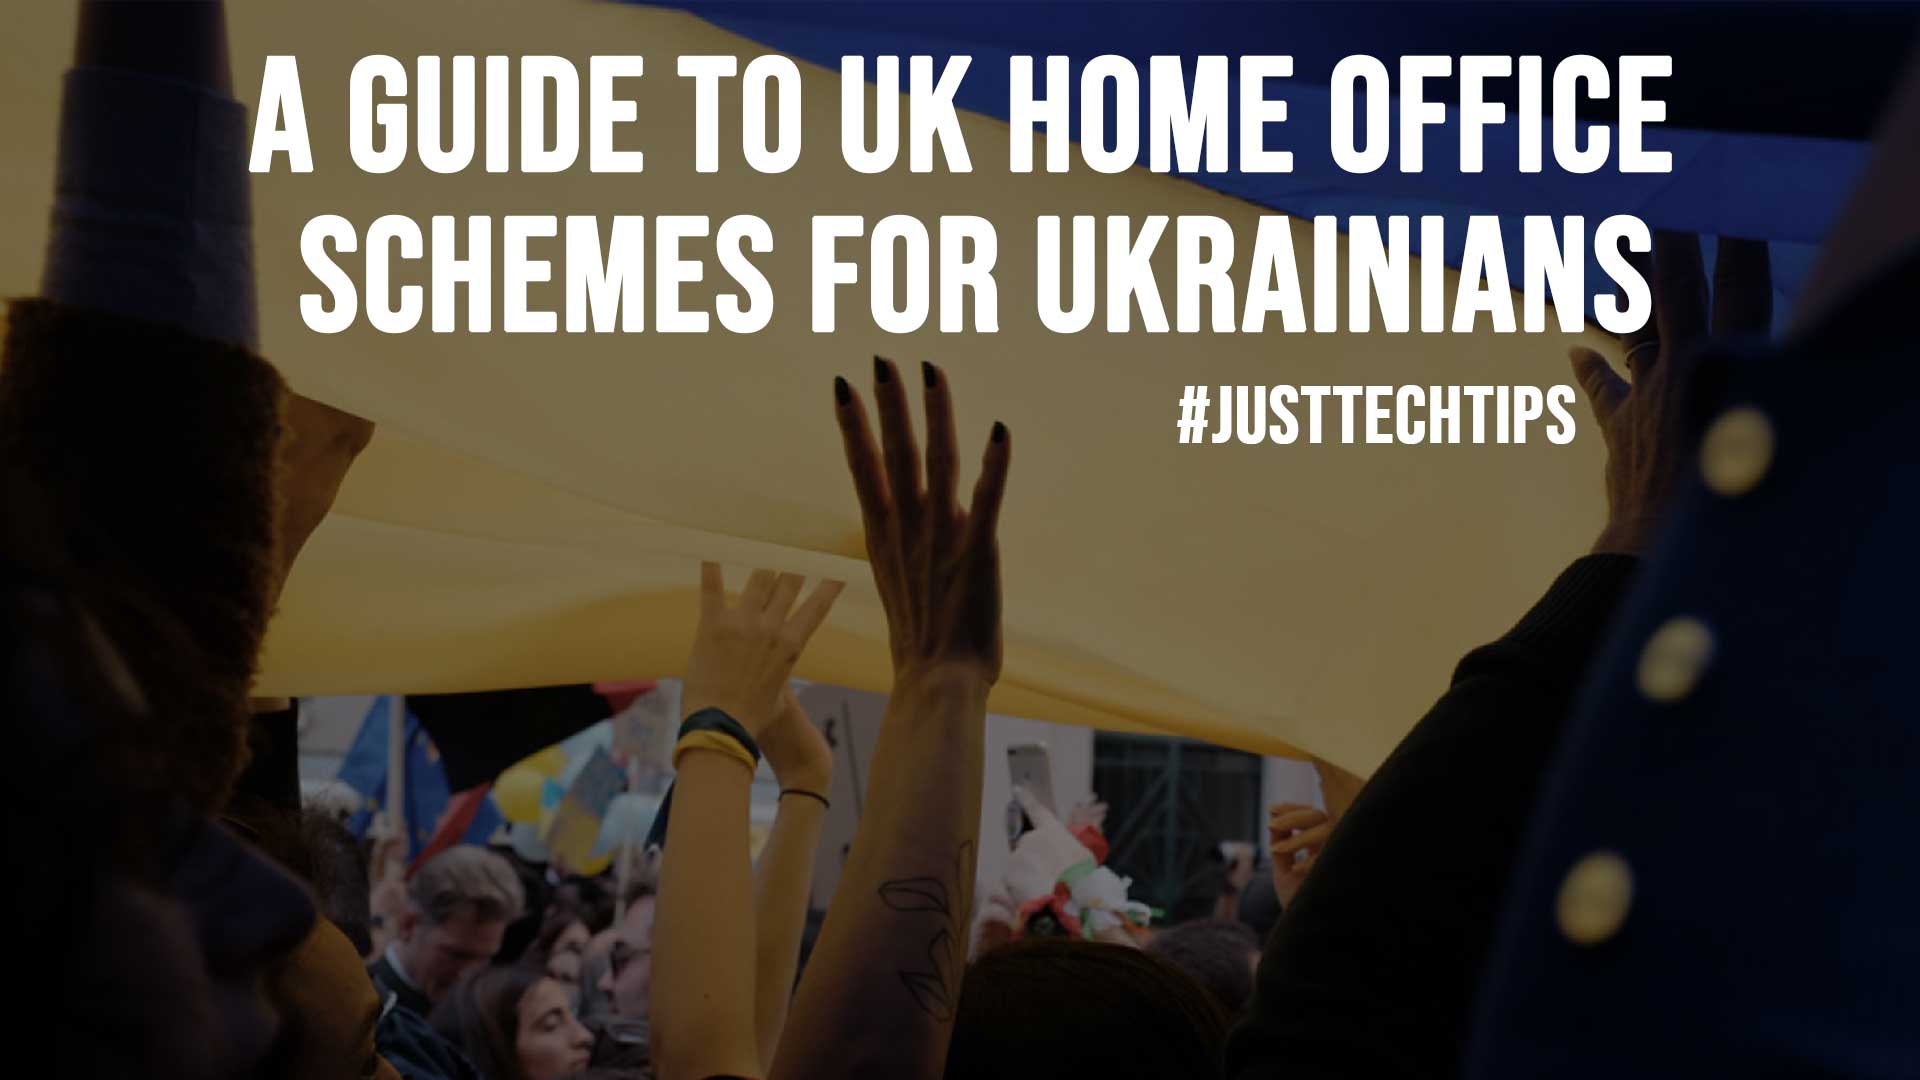 A Guide to UK Home Office Schemes for Ukrainians